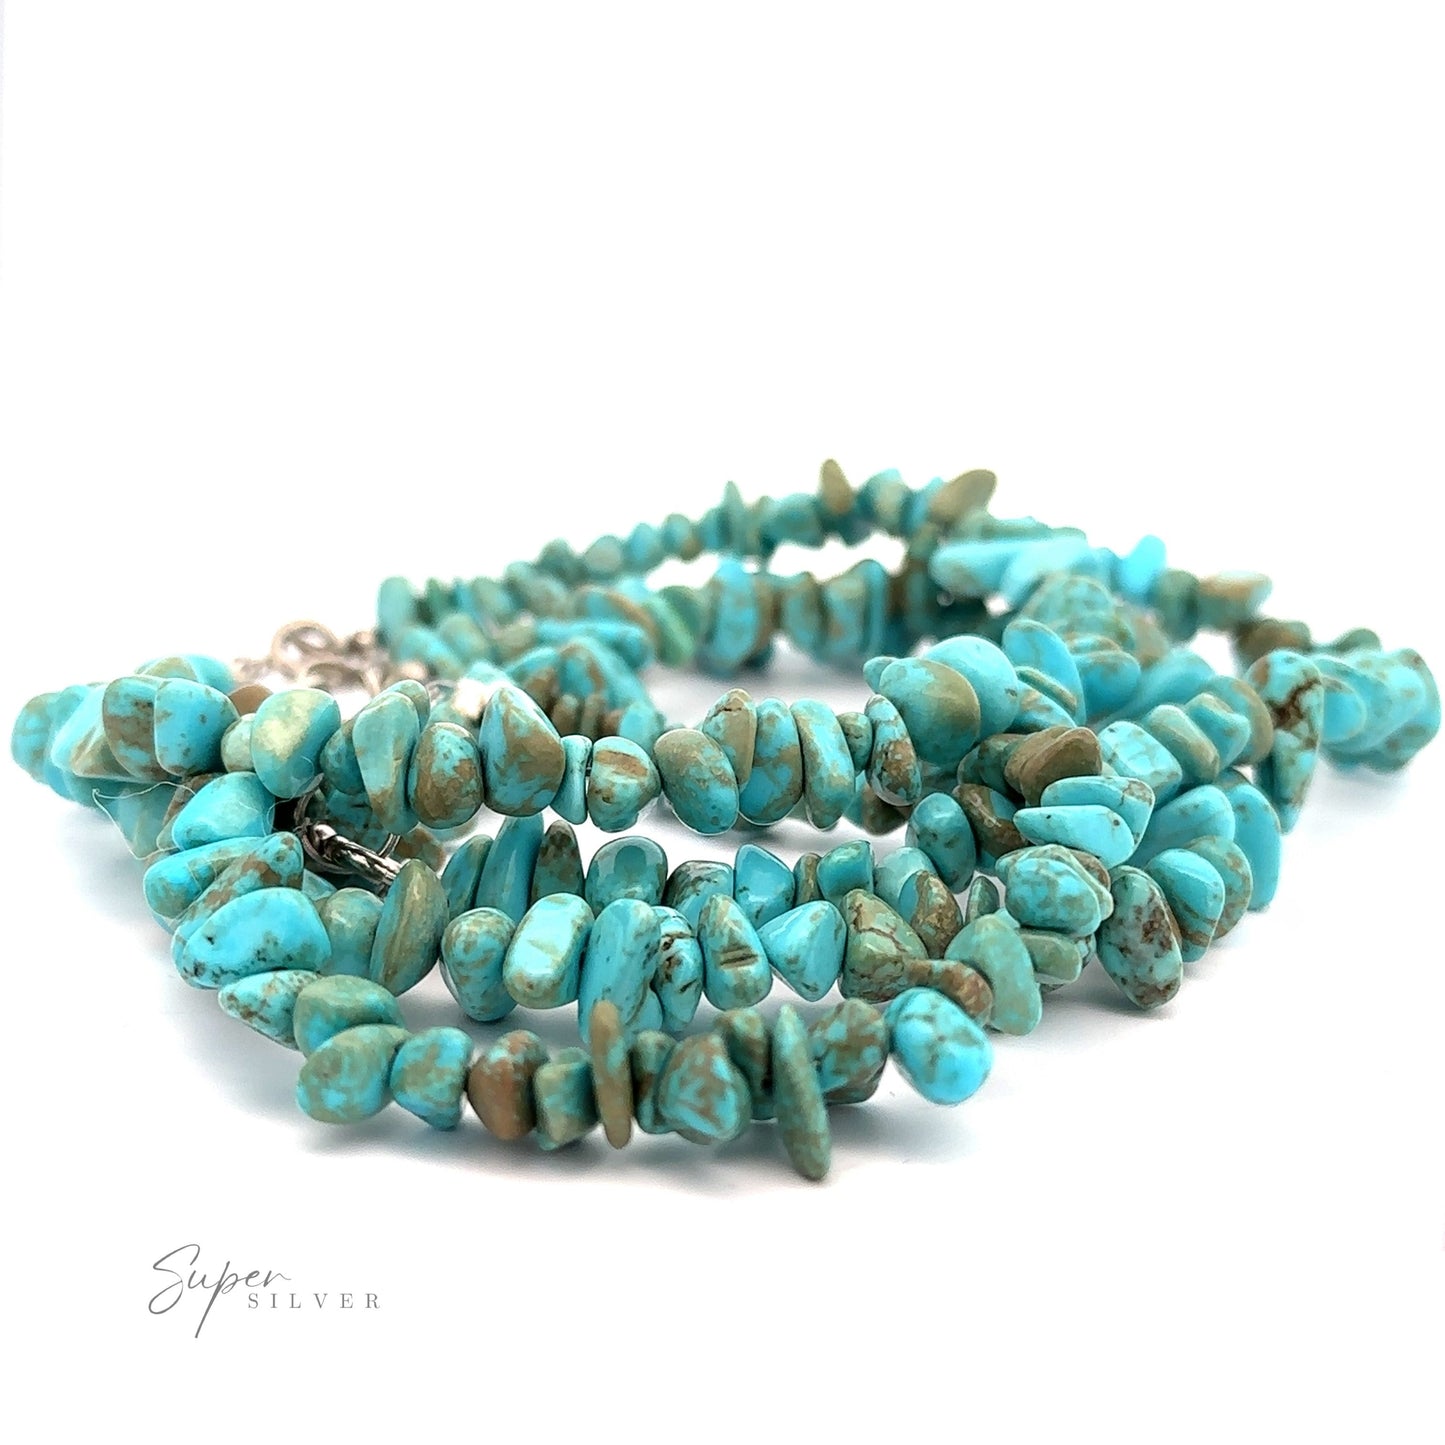 
                  
                    A Southwest Colorado Turquoise Chip Bracelet or Anklet is displayed against a white background. The beads, made of Colorado turquoise, are irregularly shaped and vary in shades of blue and green. A "Super Silver" logo is visible in the lower left corner, adding a touch of southwest charm to the piece.
                  
                